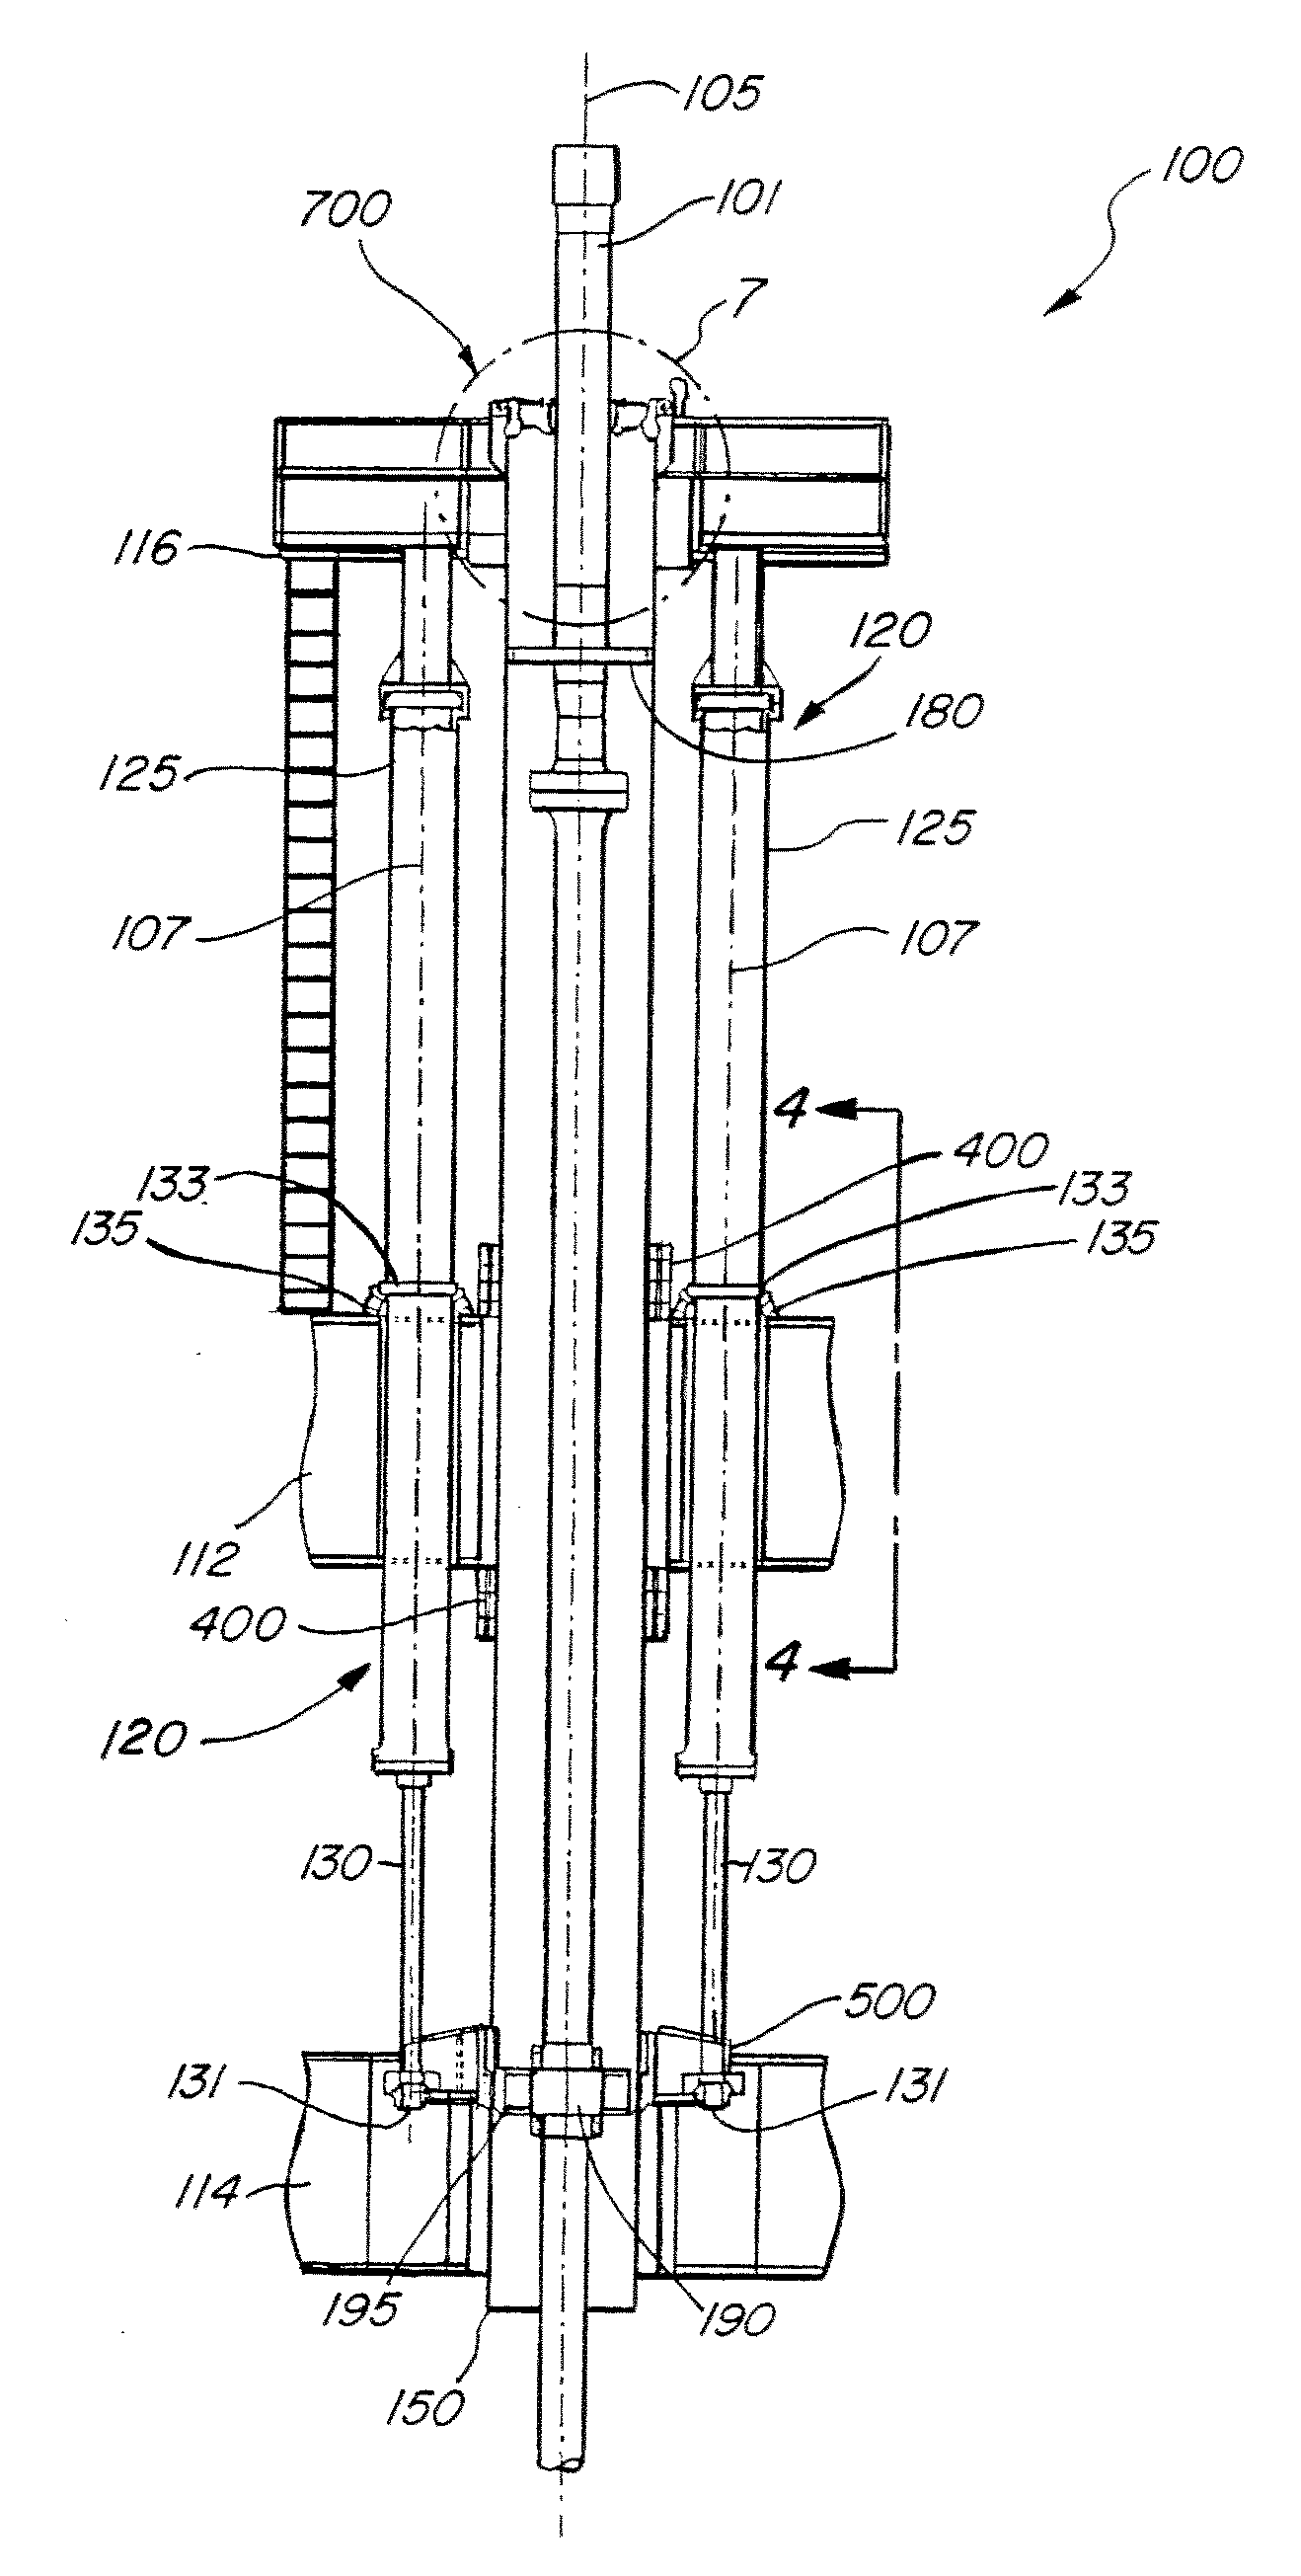 Pull-style tensioner system for a top-tensioned riser